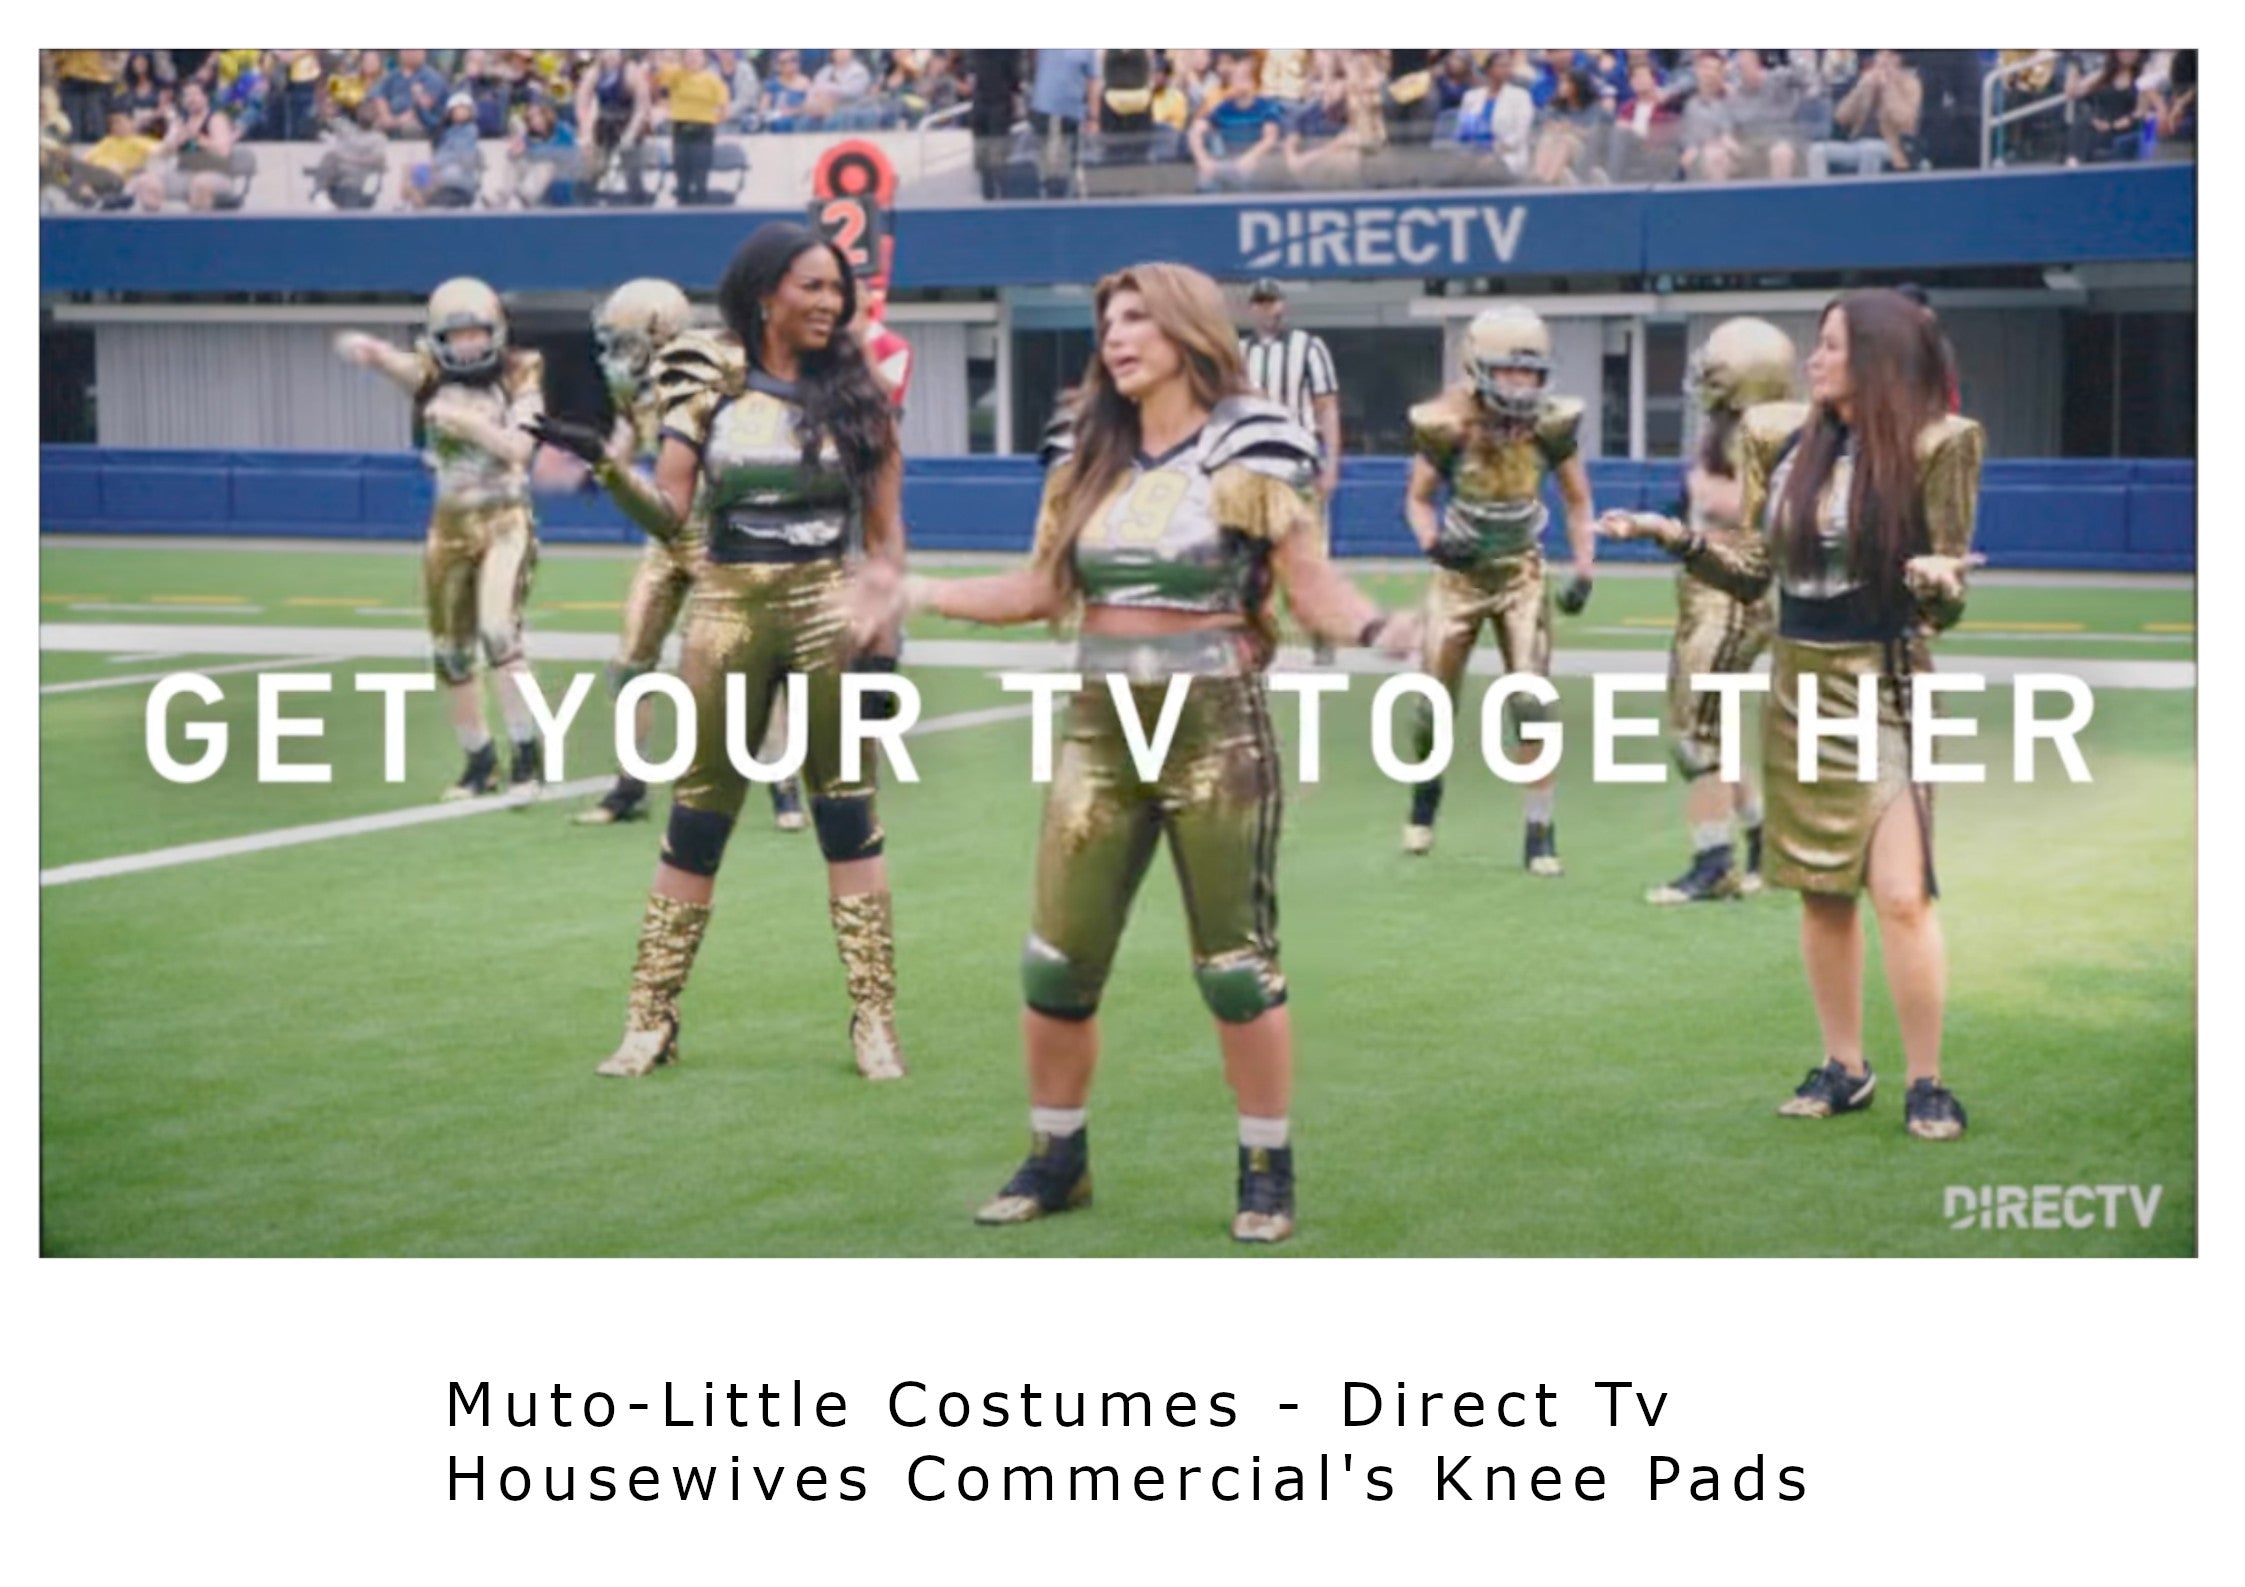 Muto-Little Costumes Direct TV Housewives Commercial